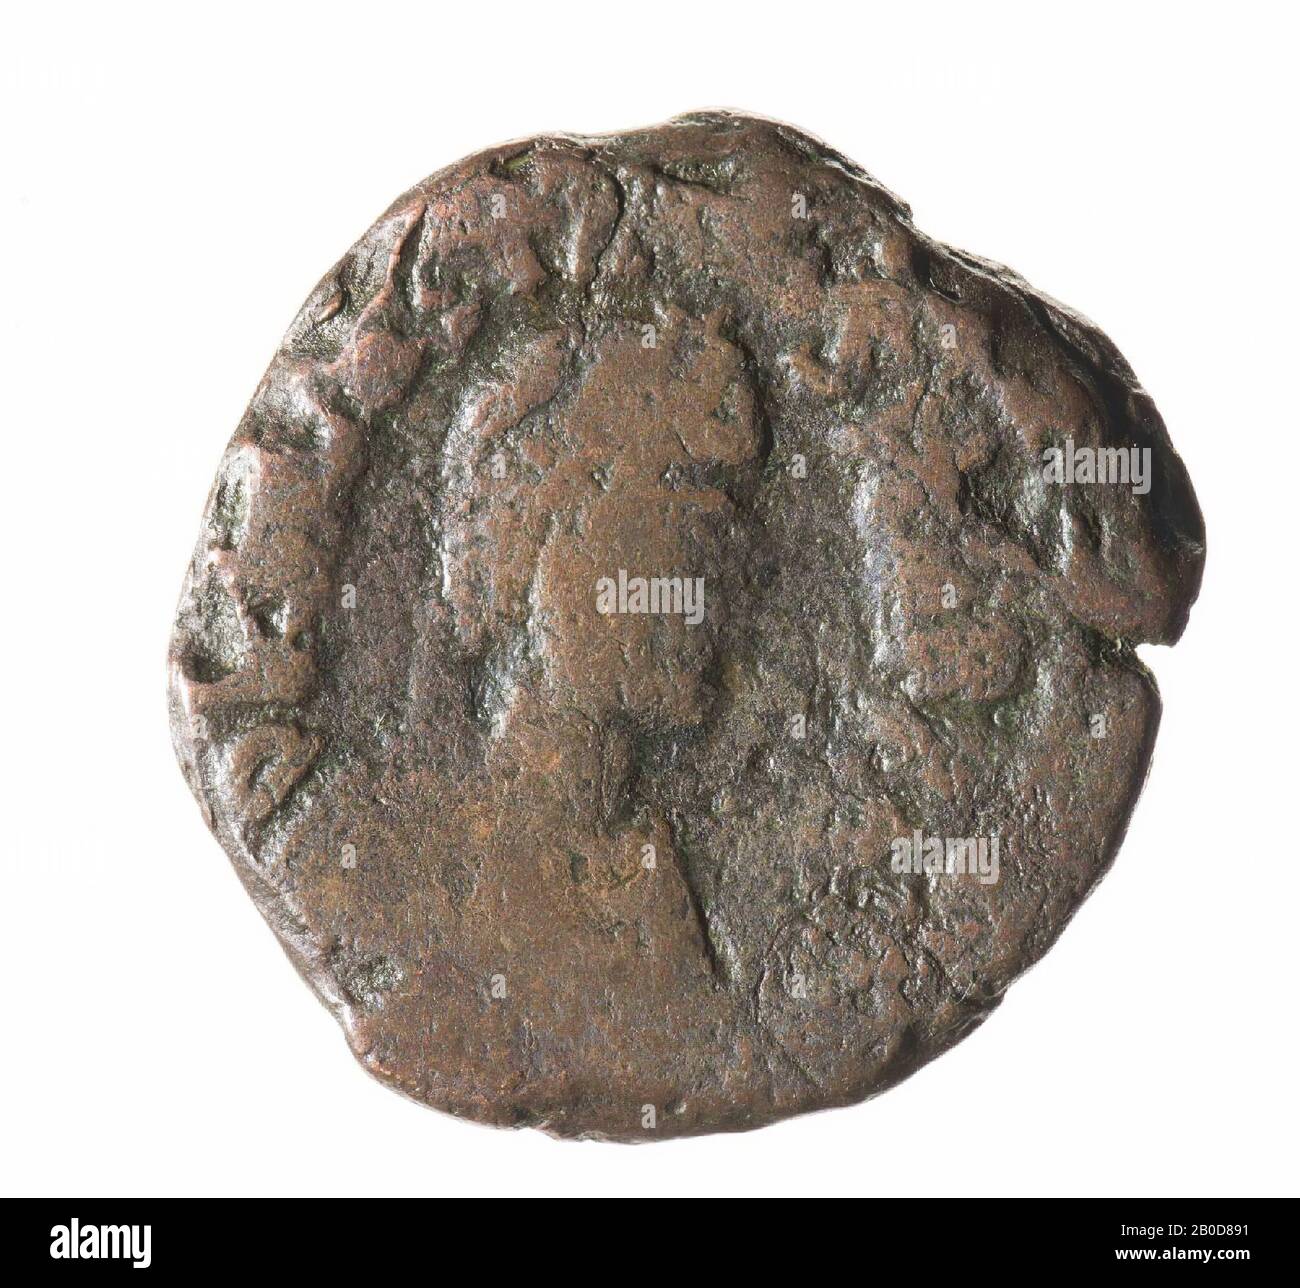 Obverse: Justin, right, worn, remains of inscription. Reverse: Large M,  right and left a star, under an E, worn above. Bottom coin CON. The large  (Greek) letter stands for a number and